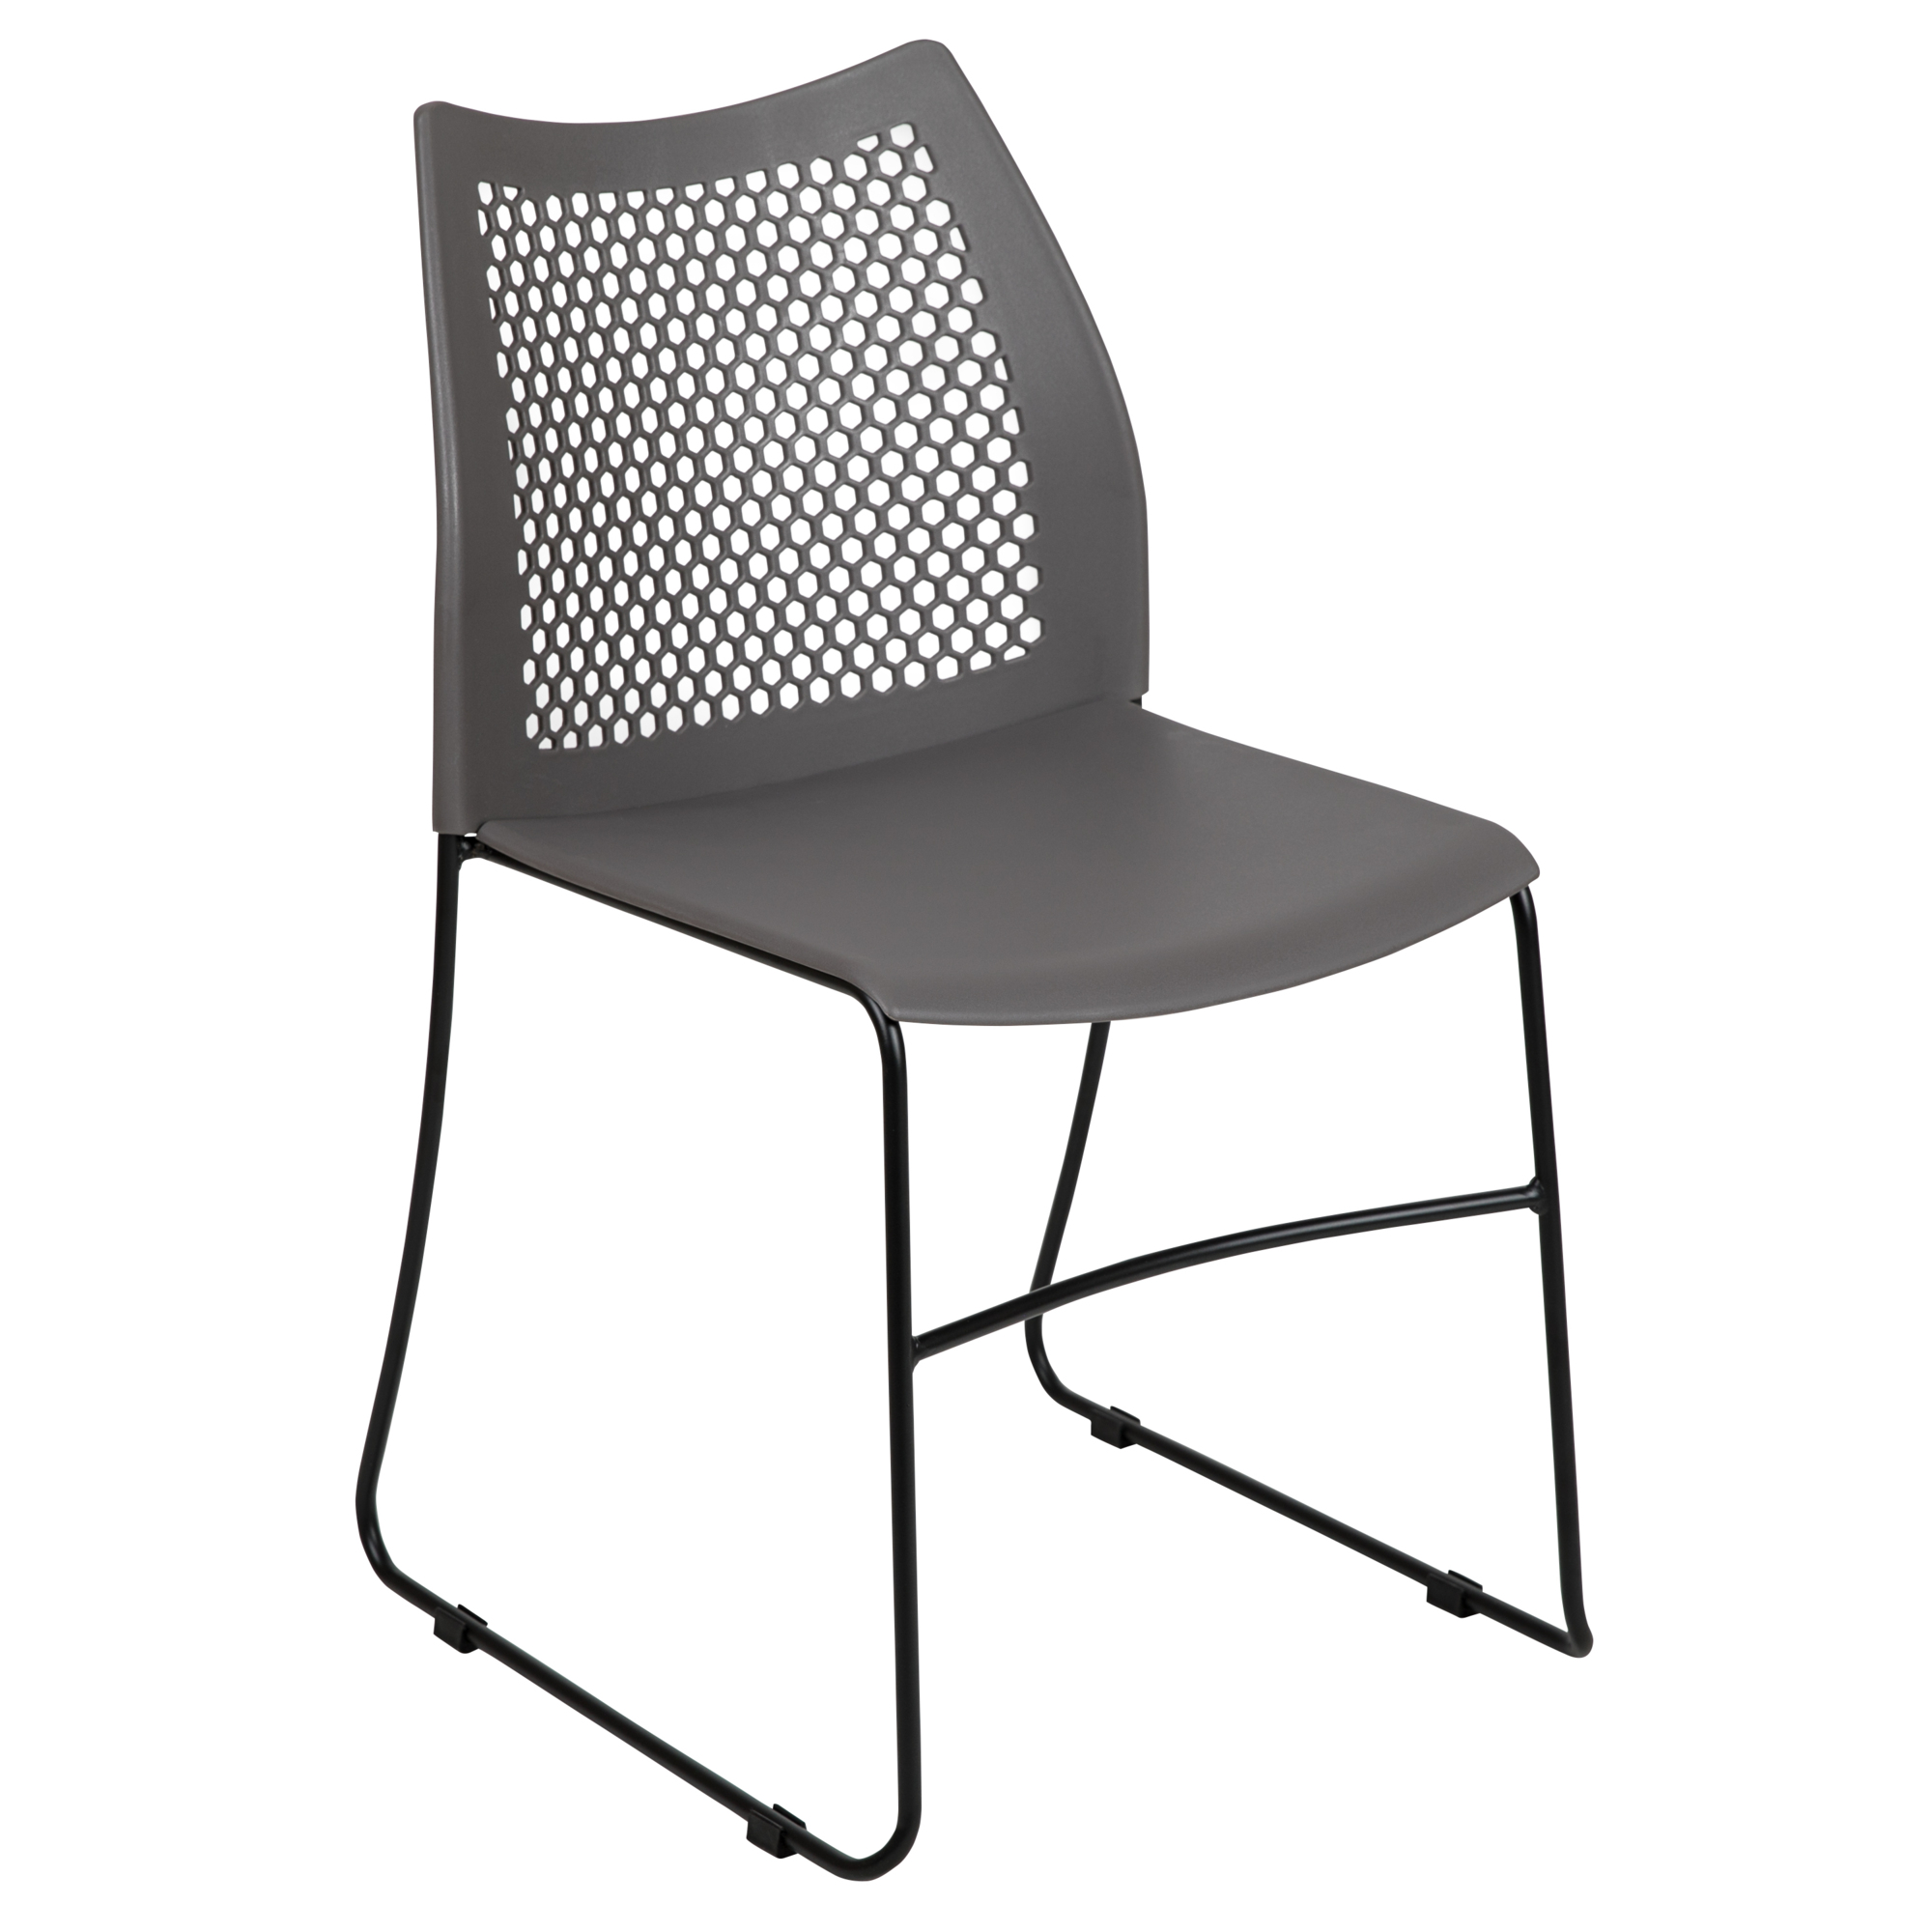 Flash Furniture, Gray Sled Base Stack Chair with Air-Vent Back, Primary Color Gray, Included (qty.) 1, Model RUT498AGY